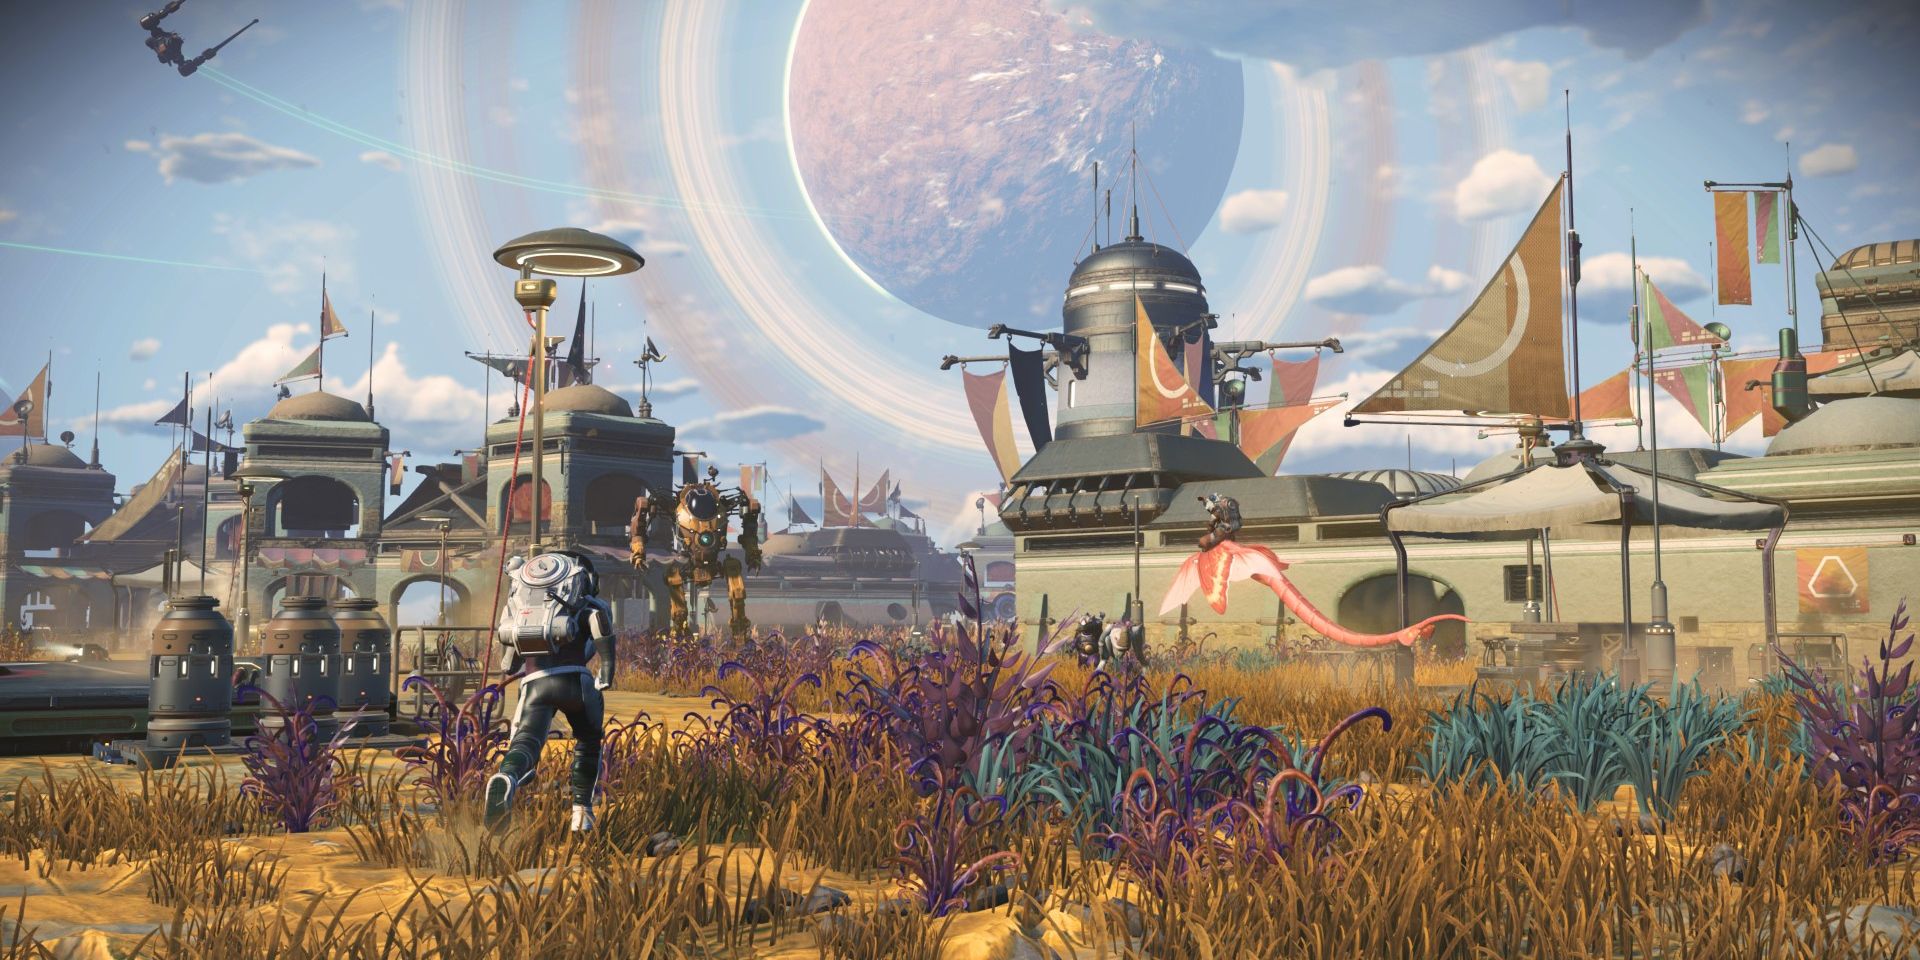 Player exploring a city in the Frontiers Update of No Mans Sky